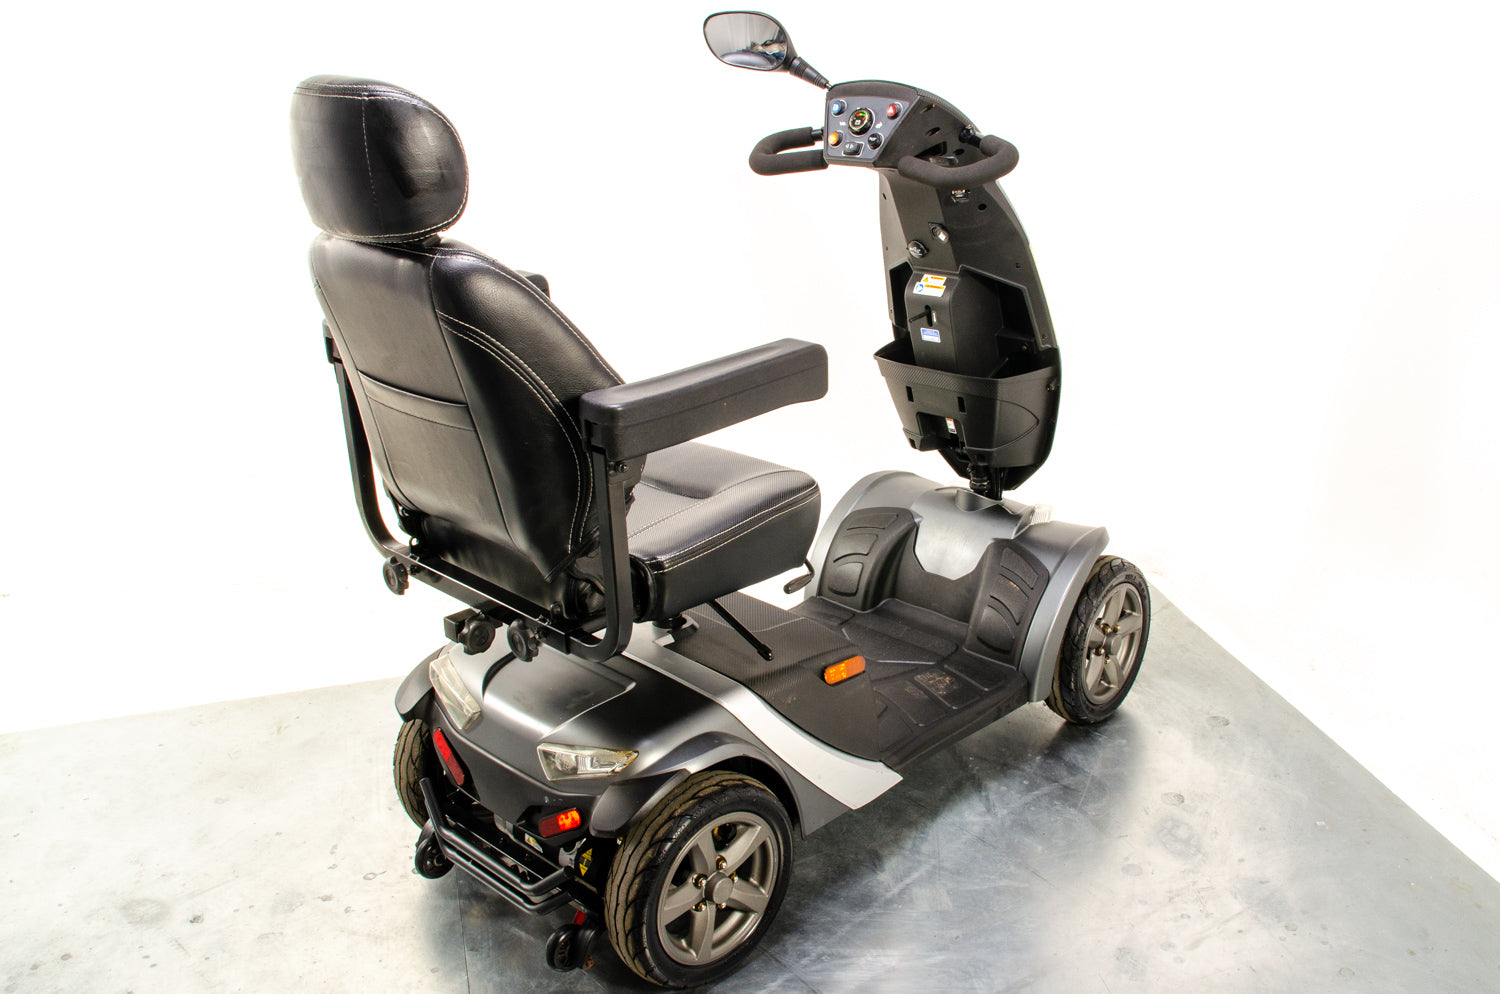 Rascal Vecta Sport Compact Used Electric Mobility Scooter 8mph Max Grip Suspension All-Terrain Road Legal Grey 13088